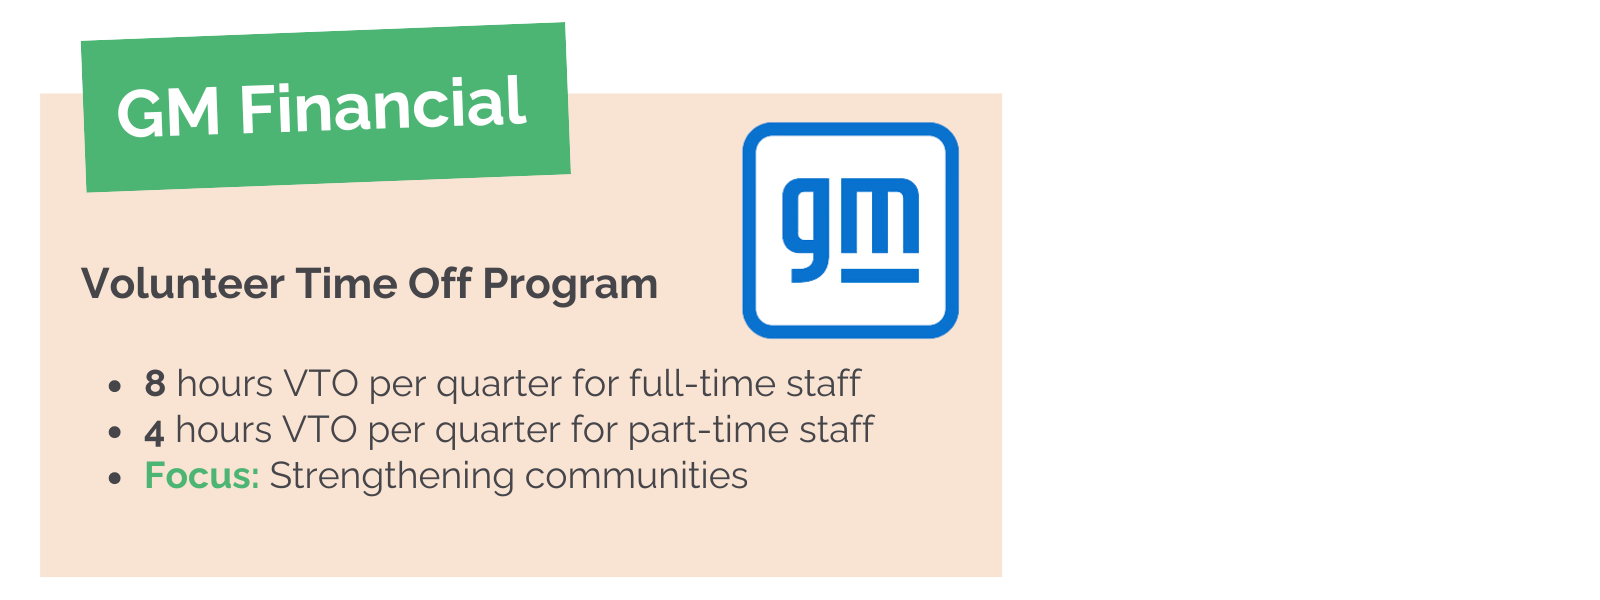 GM Financial offers paid volunteer time off programs for its employees.